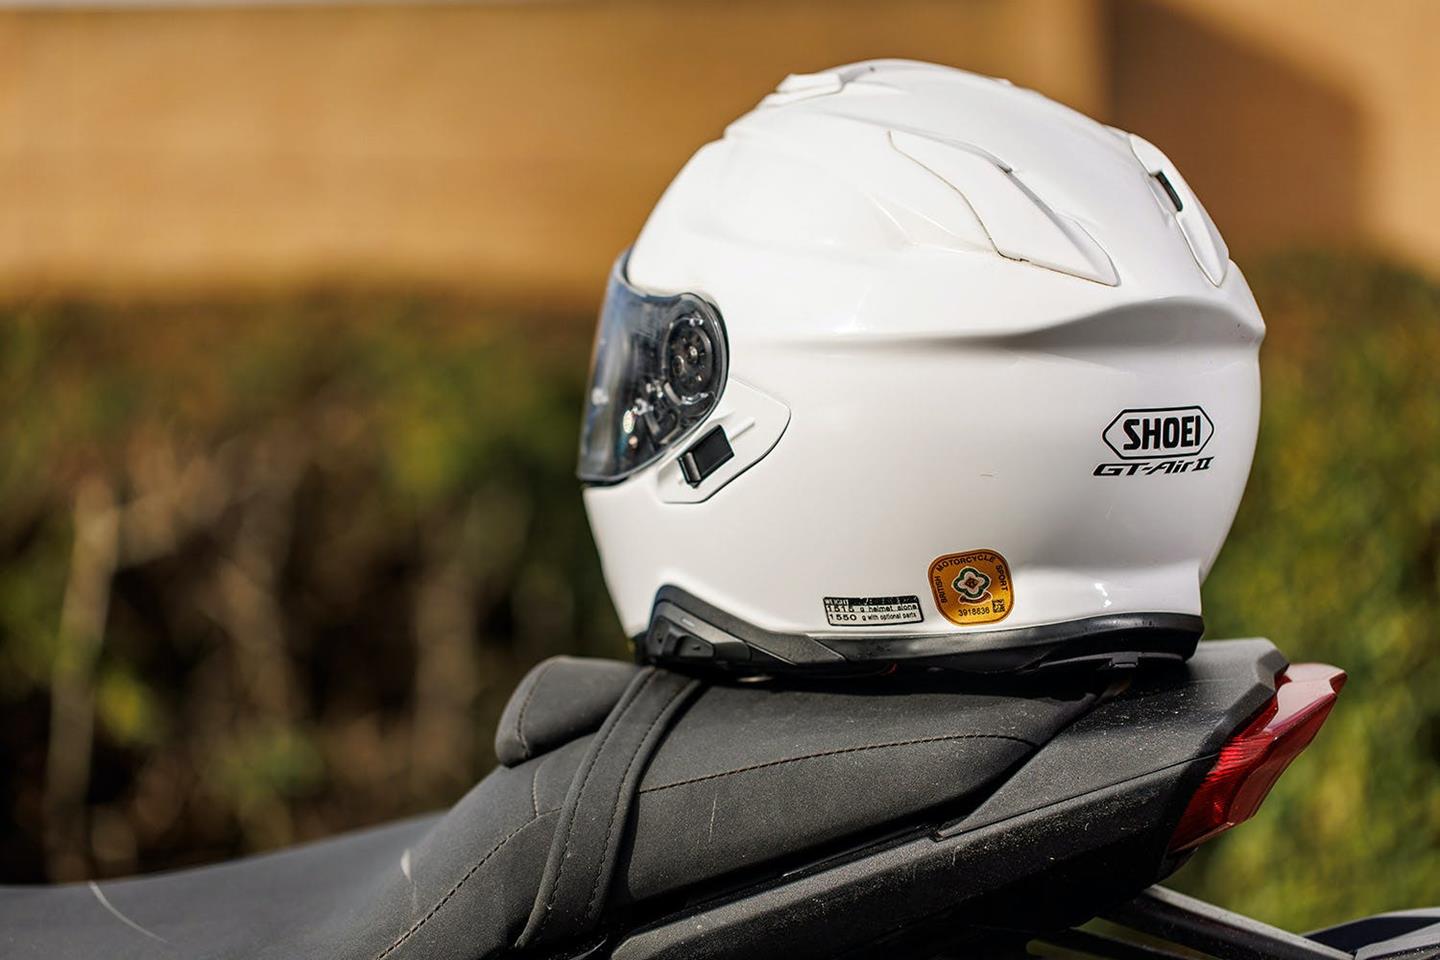 Helmet review: Shoei GT-Air II tried and tested